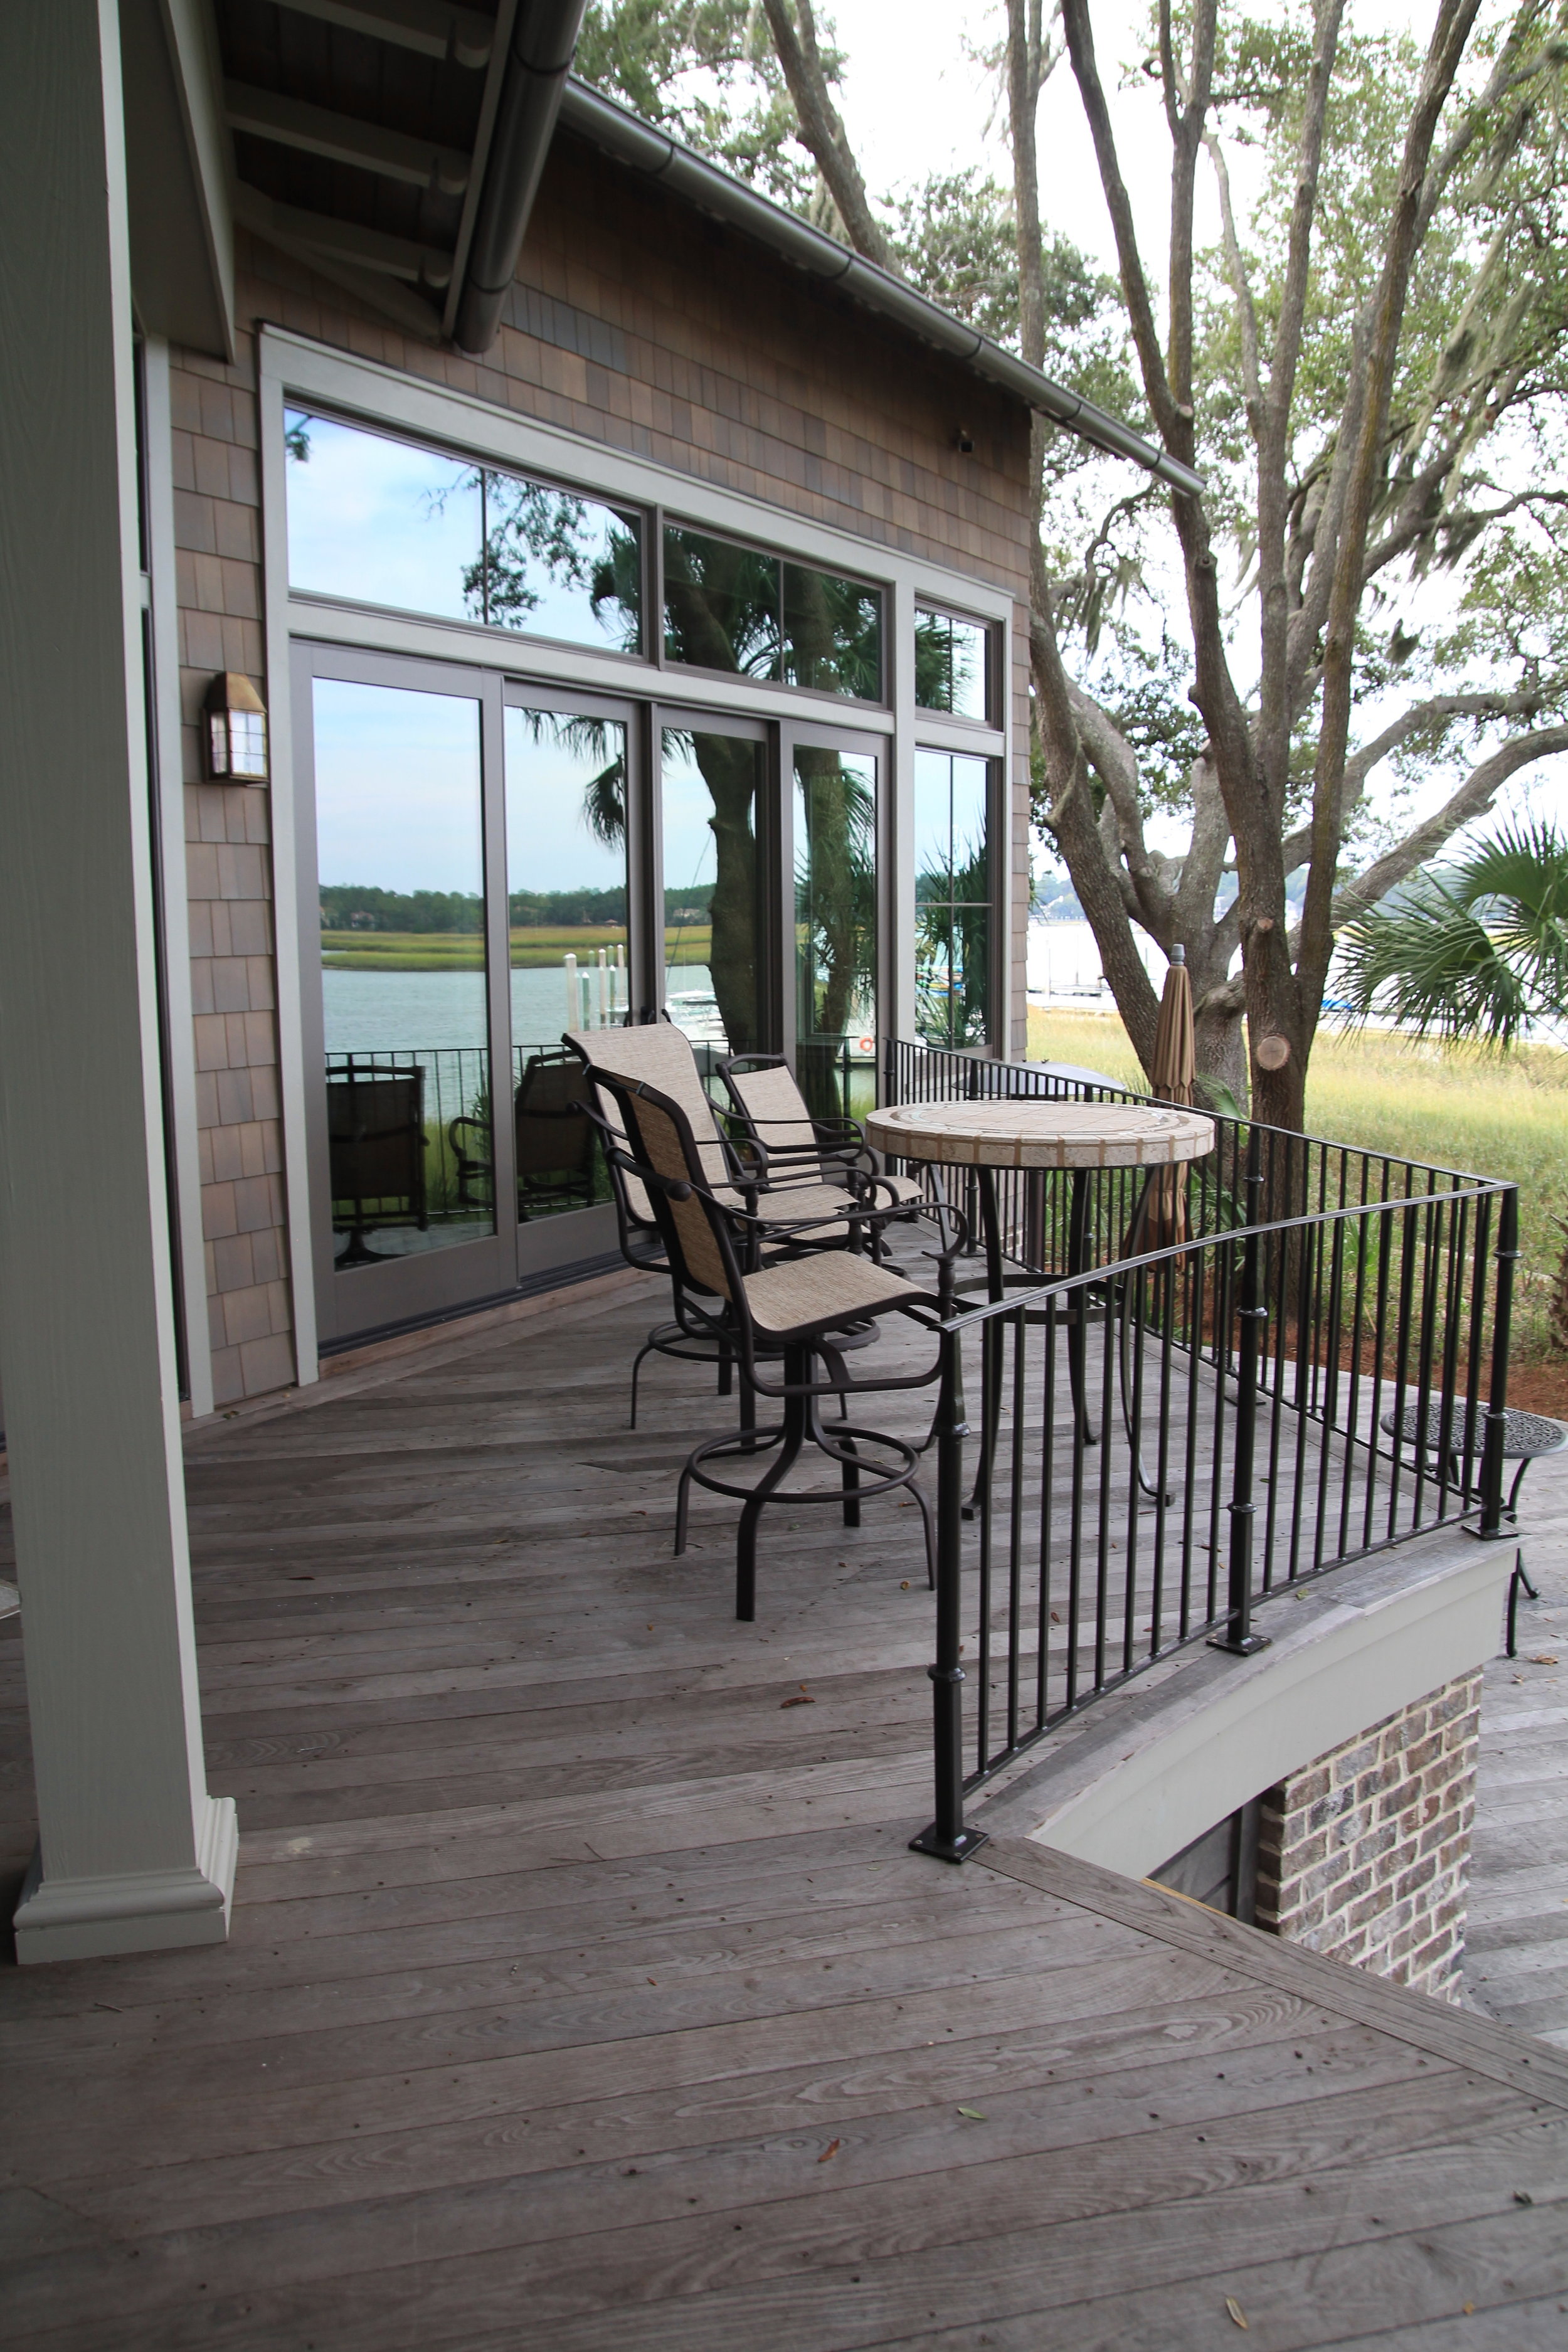  What a lovely deck, the perfect place to enjoy the view and a cup of coffee! 